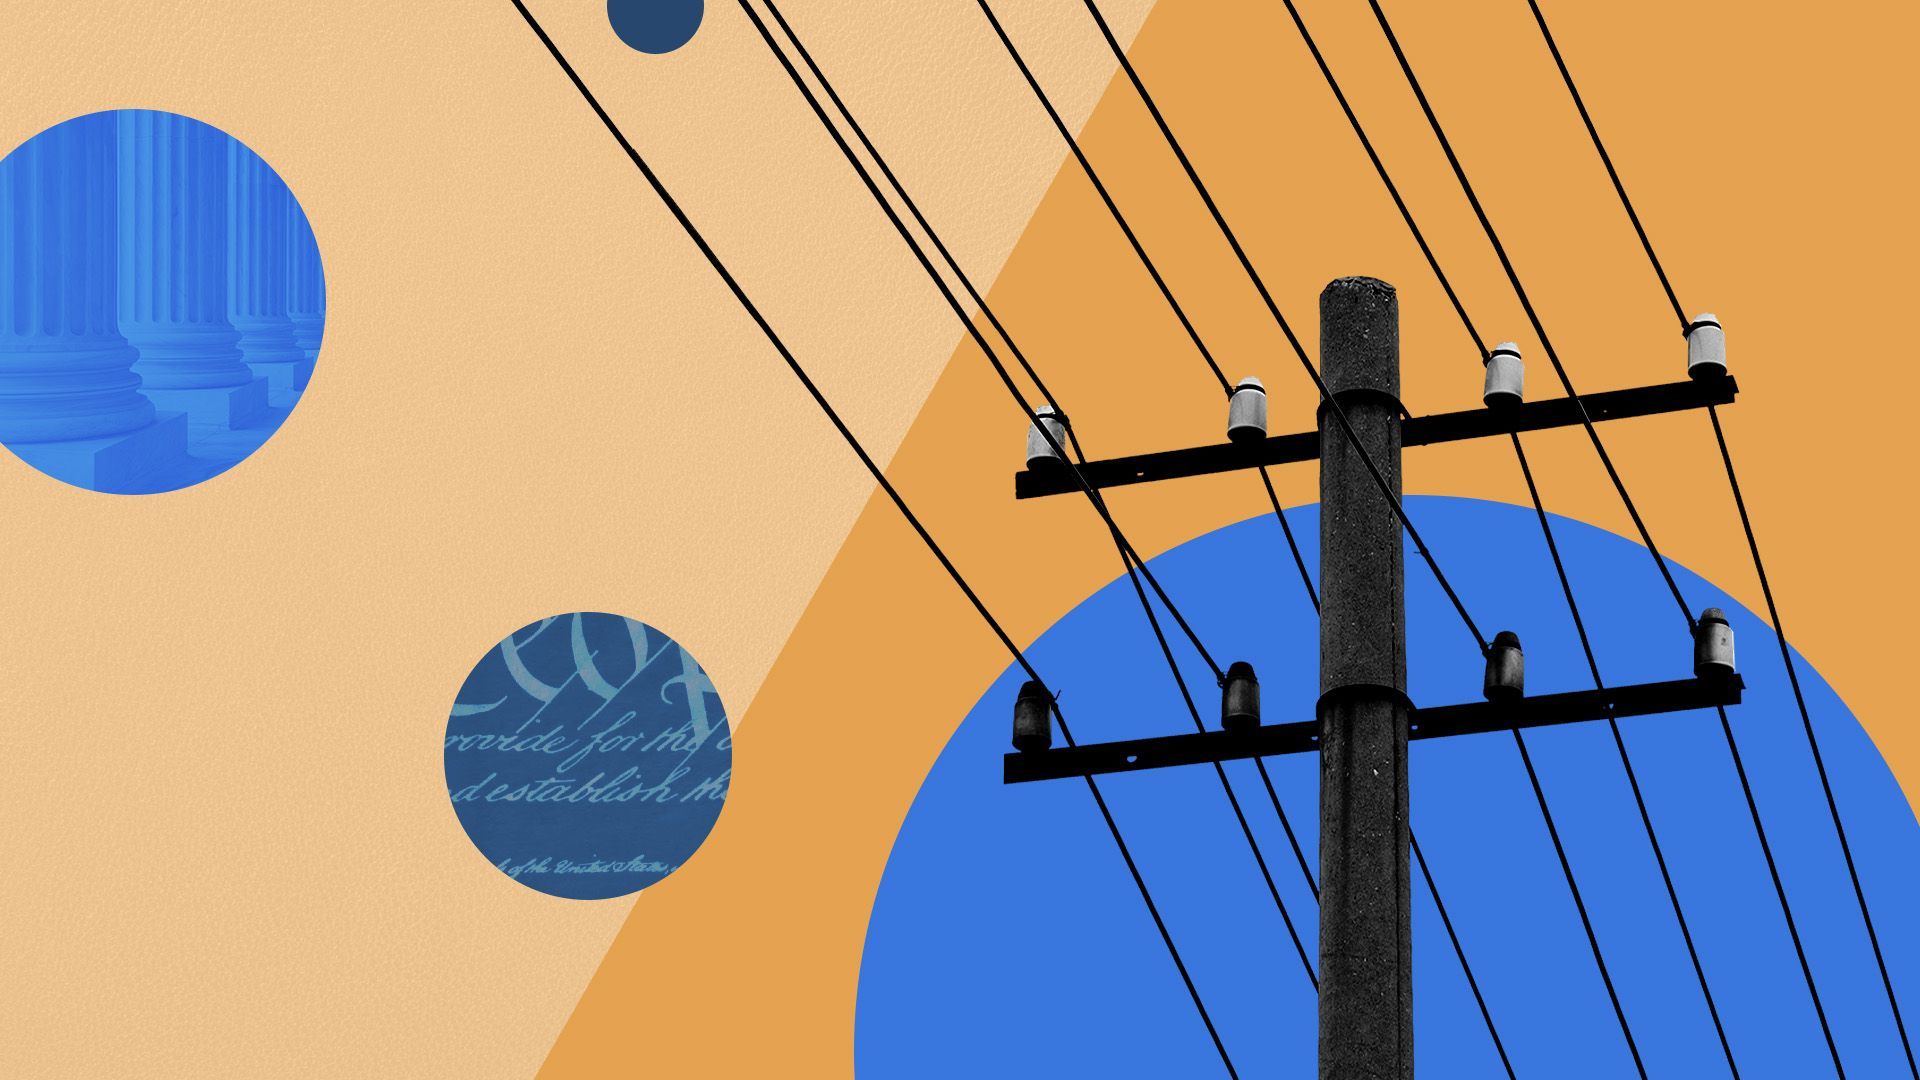 a power pole surrounded by circles overlaid with legal symbols